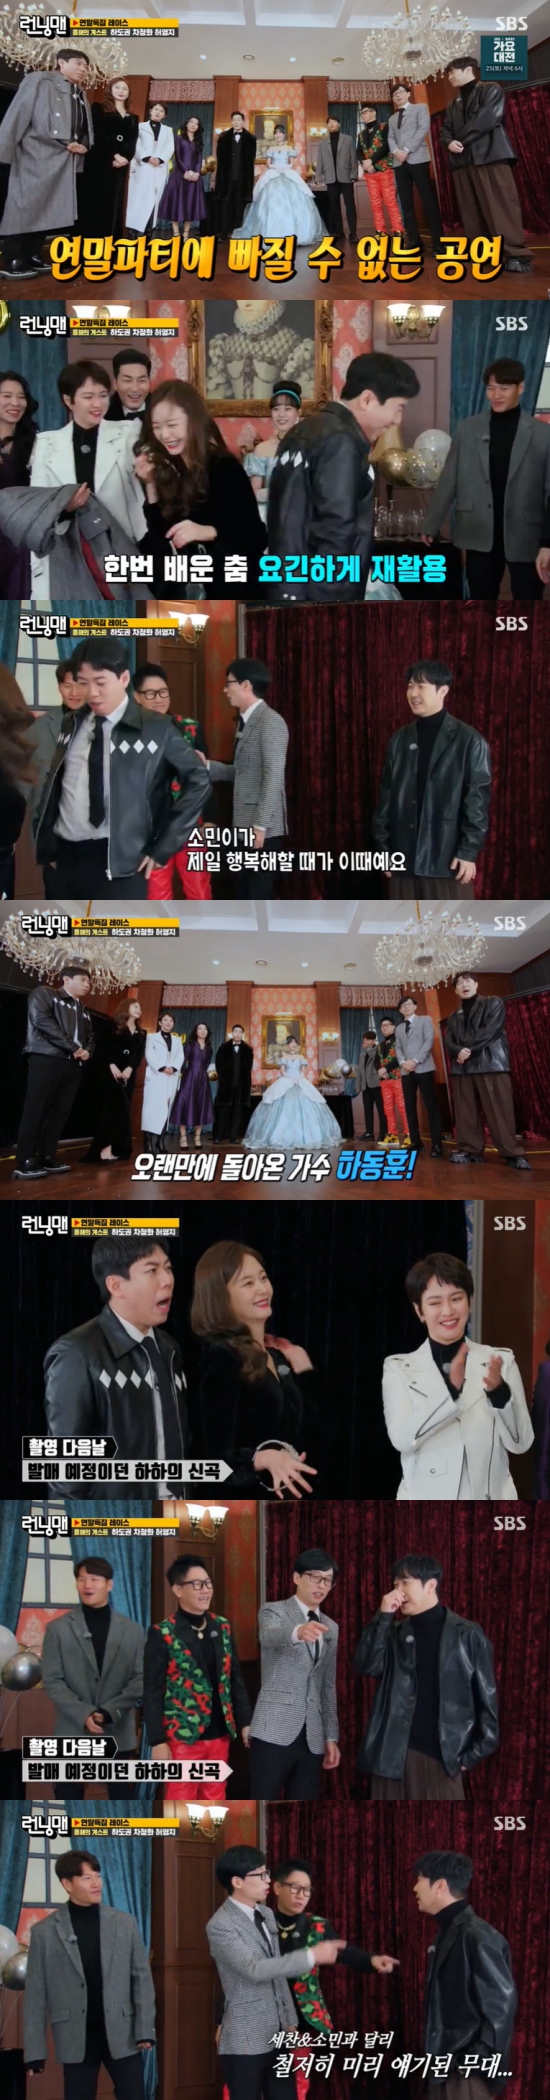 On SBS Running Man broadcasted on the 19th, Yoo Jae-Suk was featured as a special race at the end of the year, and the scene of Yo Ji-Suk mentioning Song Ji-hyos costume controversy was broadcast.On this day, the members showed styling tailored to the year-end special, and Yoo Jae-Suk admired Song Ji-hyo as soon as he saw it.Yoo Jae-Suk said, Why are you wearing clothes well? He reminded me of the recent controversy over Song Ji-hyos costume.Song Ji-hyo also boasted about the costume, saying, I always did it, but I decorated it according to the concept today. He took various poses and caught his attention.Yoo Jae-Suk said, Style is a lot of stylists, but it reflects a lot of my tendency.Kim Jong Kook said, Our stylists do not work because I do not work. I wear it as I want to wear it. Yoo Jae-Suk said, I do.The chief of staff will do it, but I will talk. Ji Suk-jin said: I wear as I give, diaper fashion last time. My classmate called me after 30 years.Do not live like that, Yoo Jae-suk said, Yongman is my brother. Furthermore, Song Ji-hyo said, My head grows quickly. He wrapped his staff, and the members praised him for saying, It looks good on my head.In addition, this year Running Man was a guest of the year, and Hadokwon, Cha Chung Hwa and Huh Youngji appeared, and the production team prepared the race with the concept of the year-end party.The production team said, The first stage Yang Se-chan, Jeon So-mins When We Disco.I asked for the stage, Yang Se-chan and Jeon So-min danced hard to the sudden music.Yoo Jae-Suk said, When the people are the happiest, when they match what they are.It is great that Sechan does not accept it, he laughed, and Jeon So-min said, Why are you so hard? Who wants to date? Yoo Jae-Suk said, Somin did not watch the drama. Take a look at it. Cha Chung-hwa praised it as too sexy. I was surprised.Im really lethal, said Jeon So-min, who expressed confidence.The production team said, The second time is to listen to a new song by singer Ha Dong-hoon who has returned for a long time. Haha said, I said I did not.Yoo Jae-Suk said, Do you do this way to promote your new song? And Haha said, I said I did not.However, the production team laughed by inserting the subtitle Unlike the Sechan & the Somin, the stage was thoroughly talked about.Photo = SBS broadcast screen